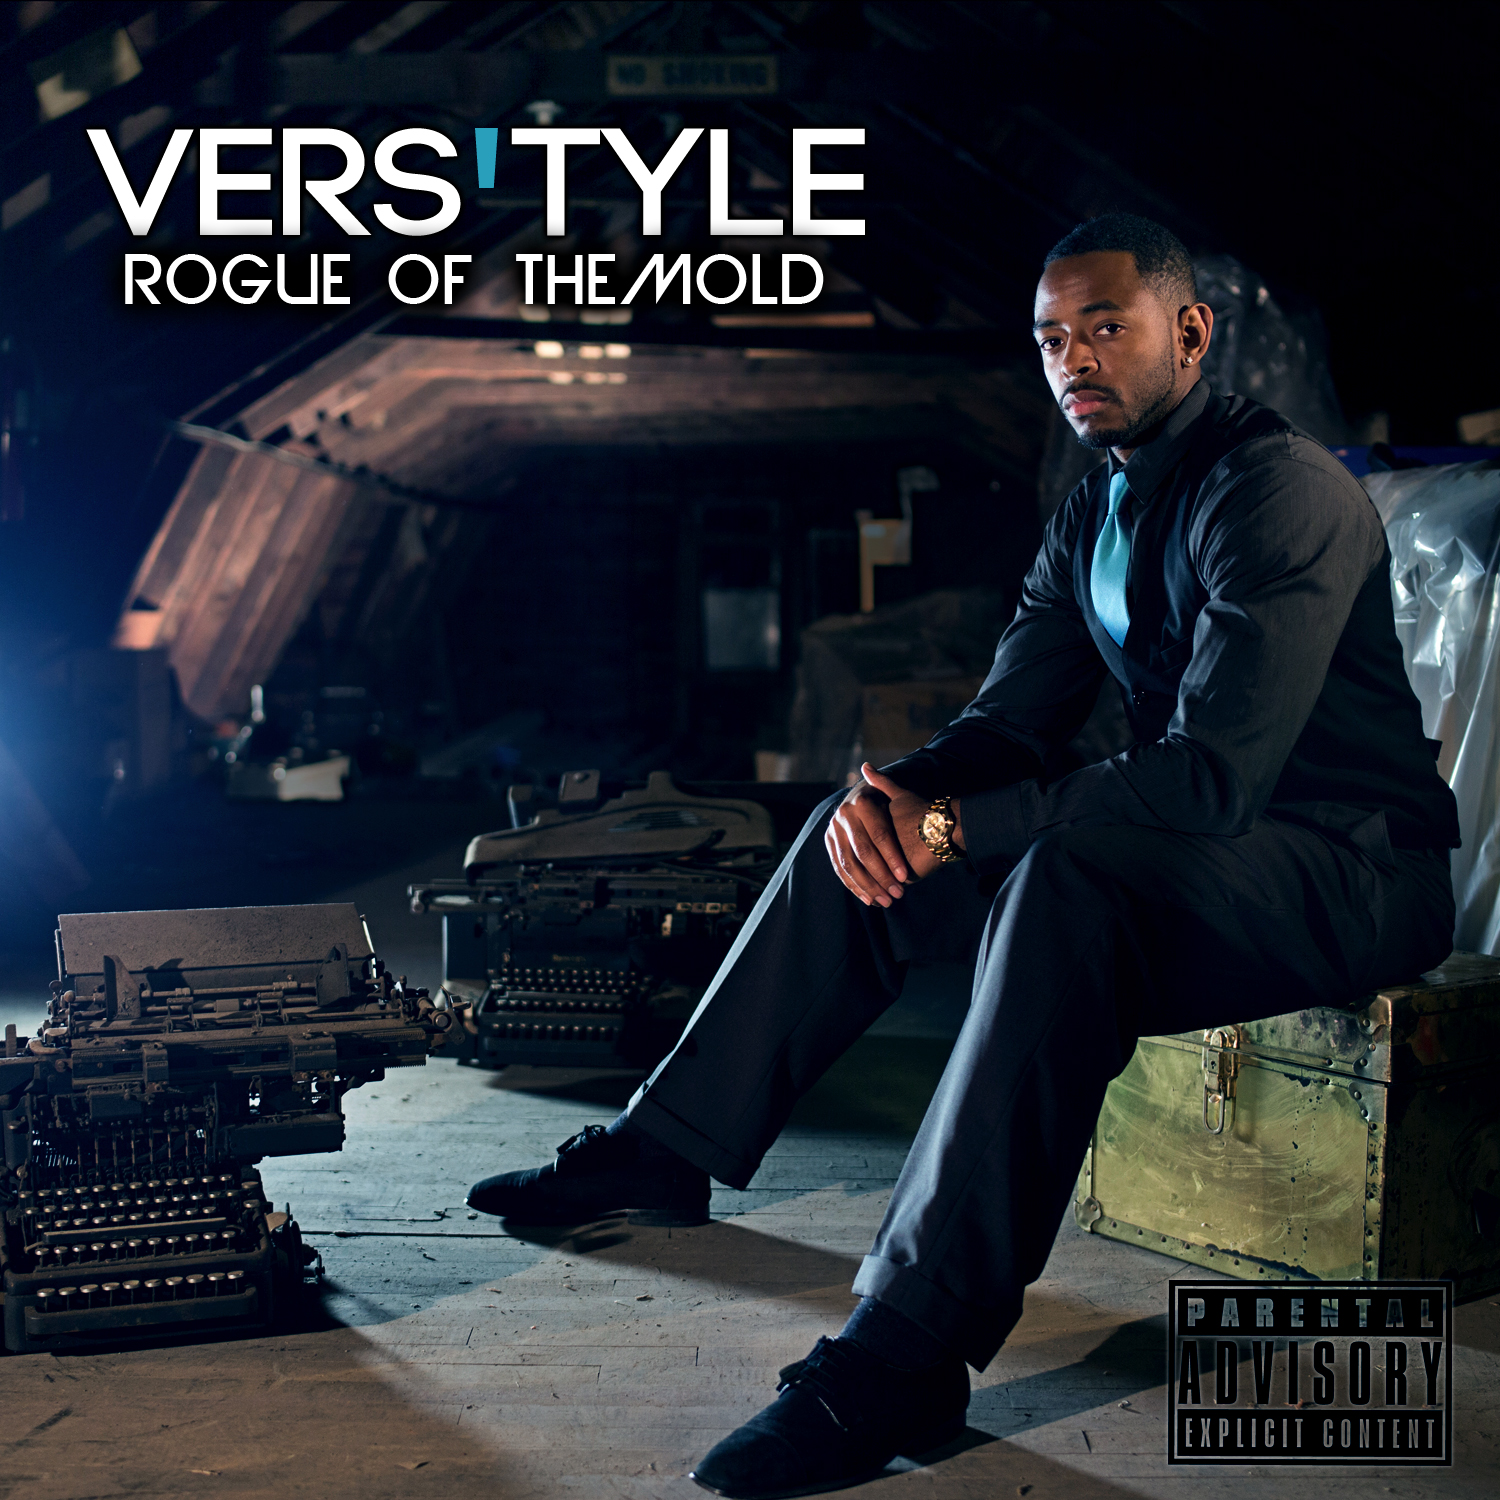 VERSTYLE-ROGUE-OF-THE-MOLD-ALBUM-COVER-FRONT